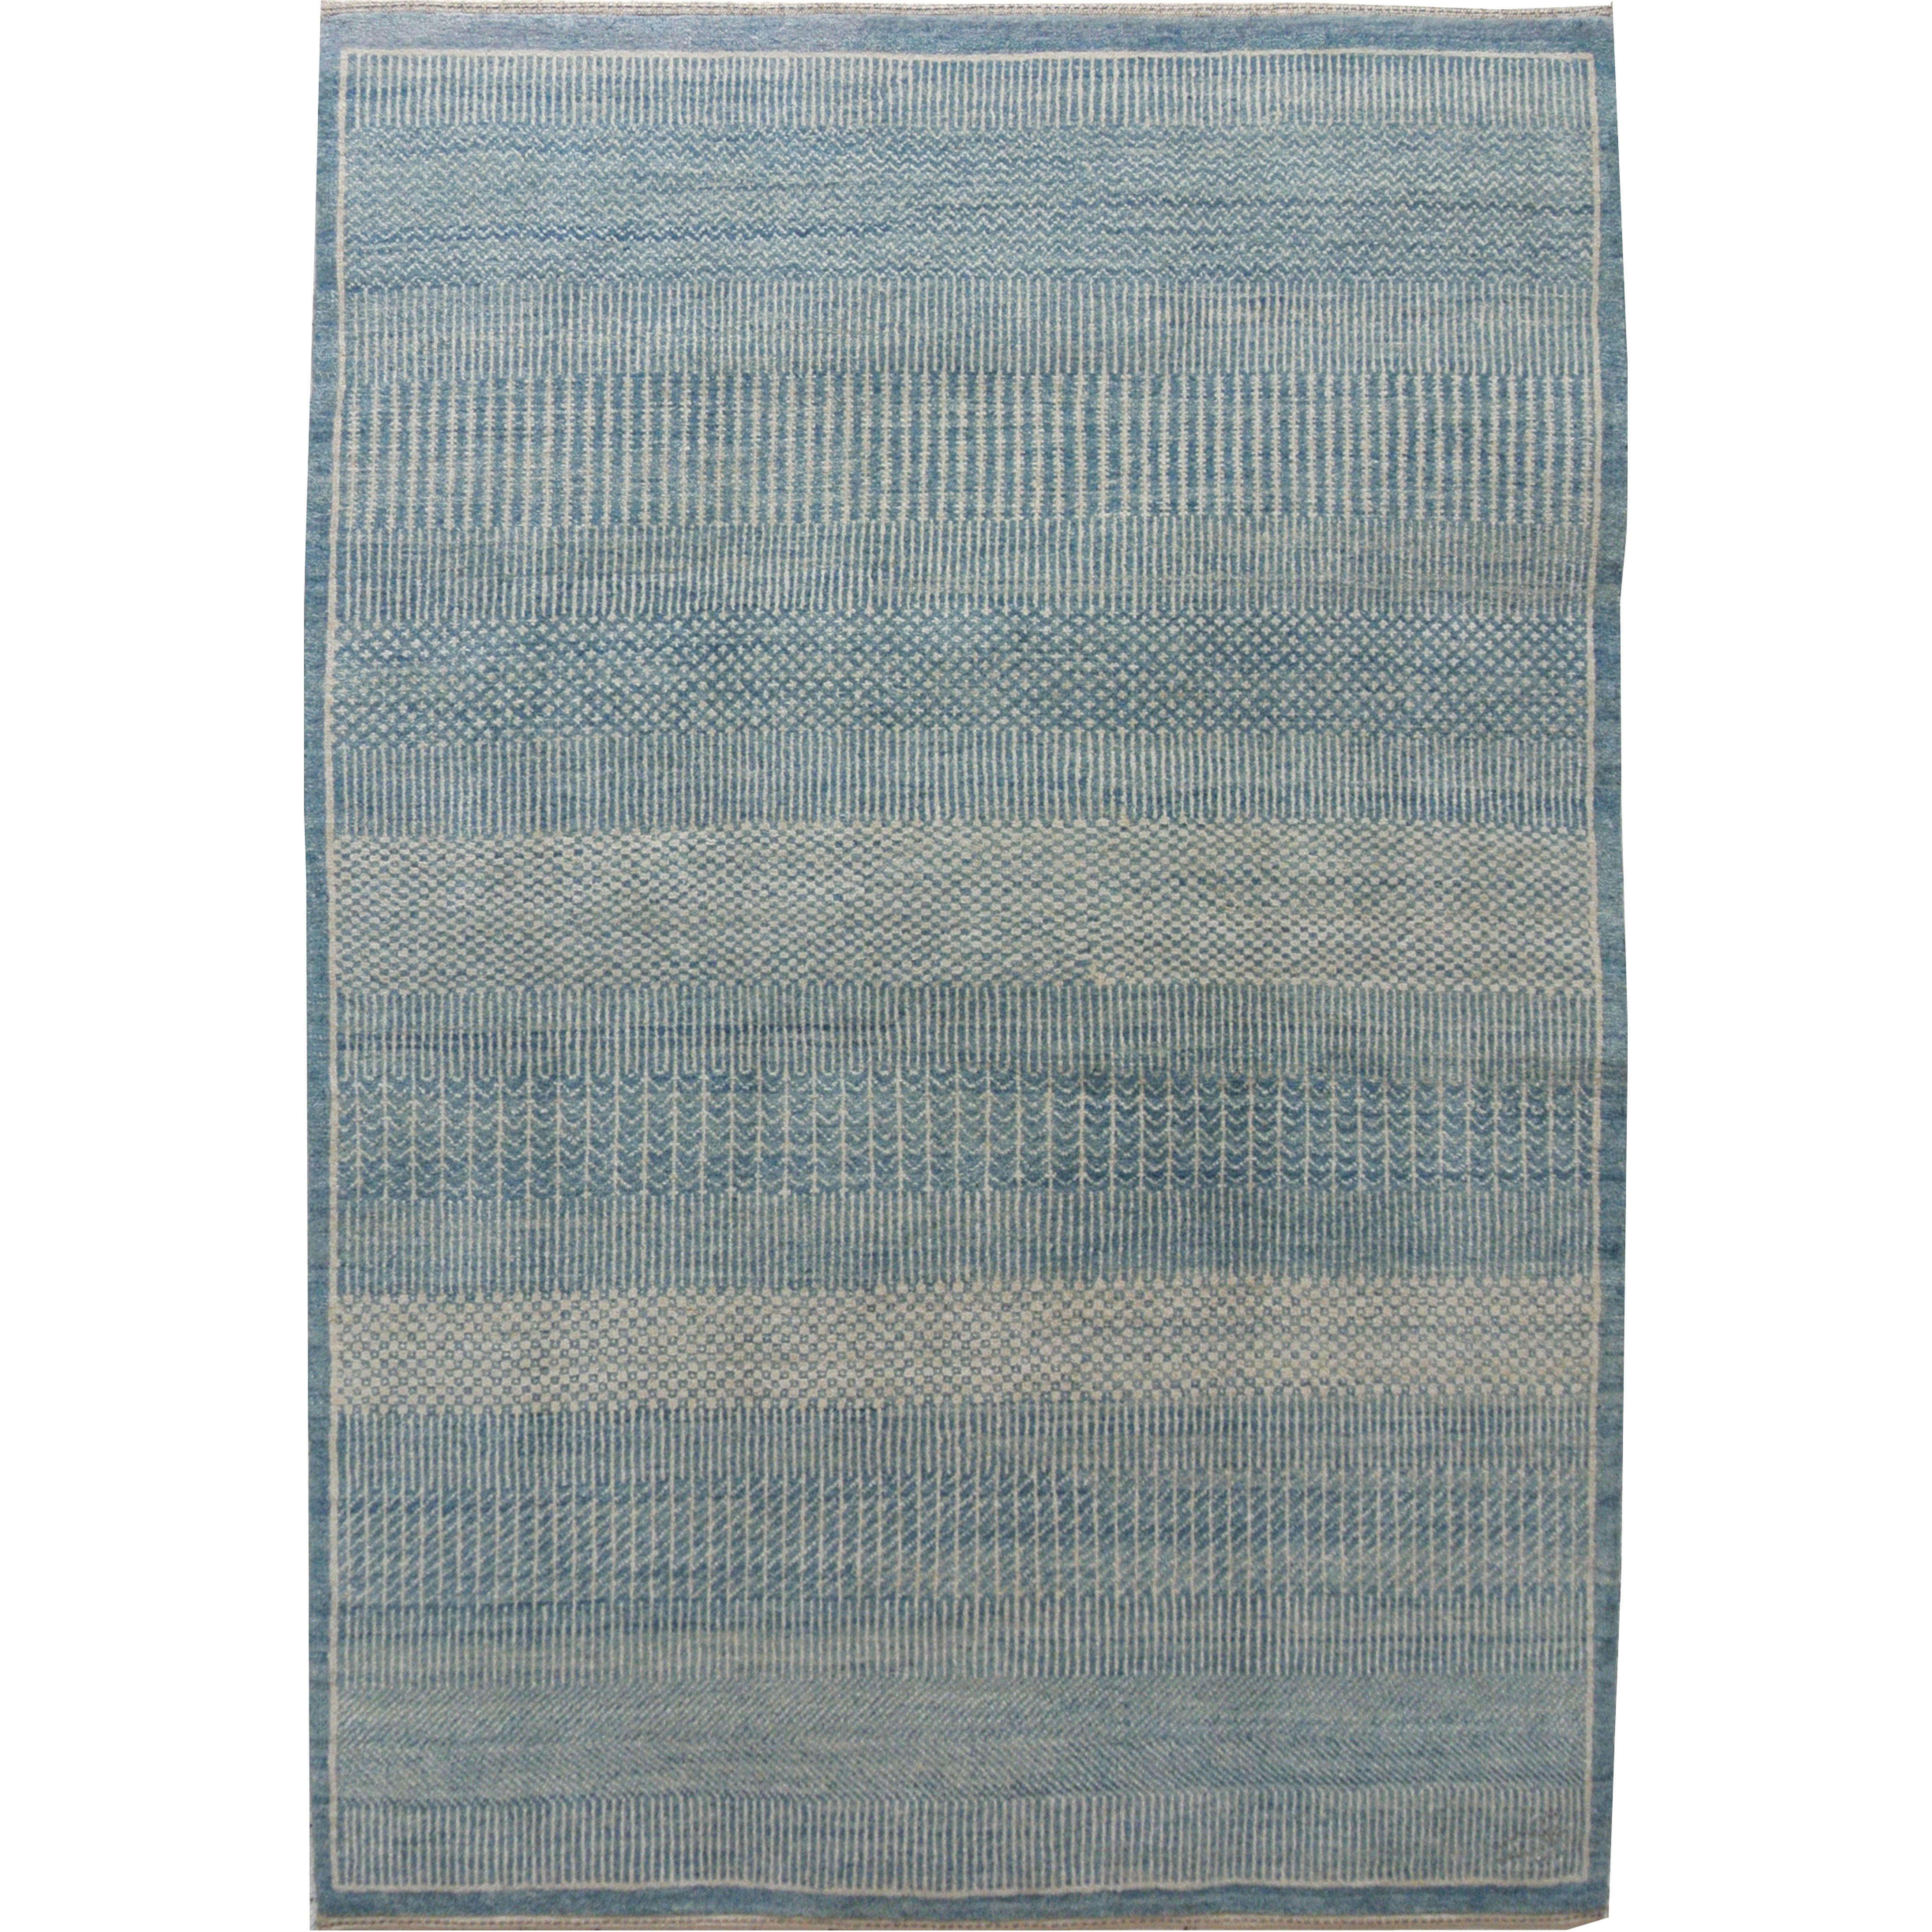 Orley Shabahang "Rain" Contemporary Persian Rug, Blue and Cream, 5' x 7' For Sale